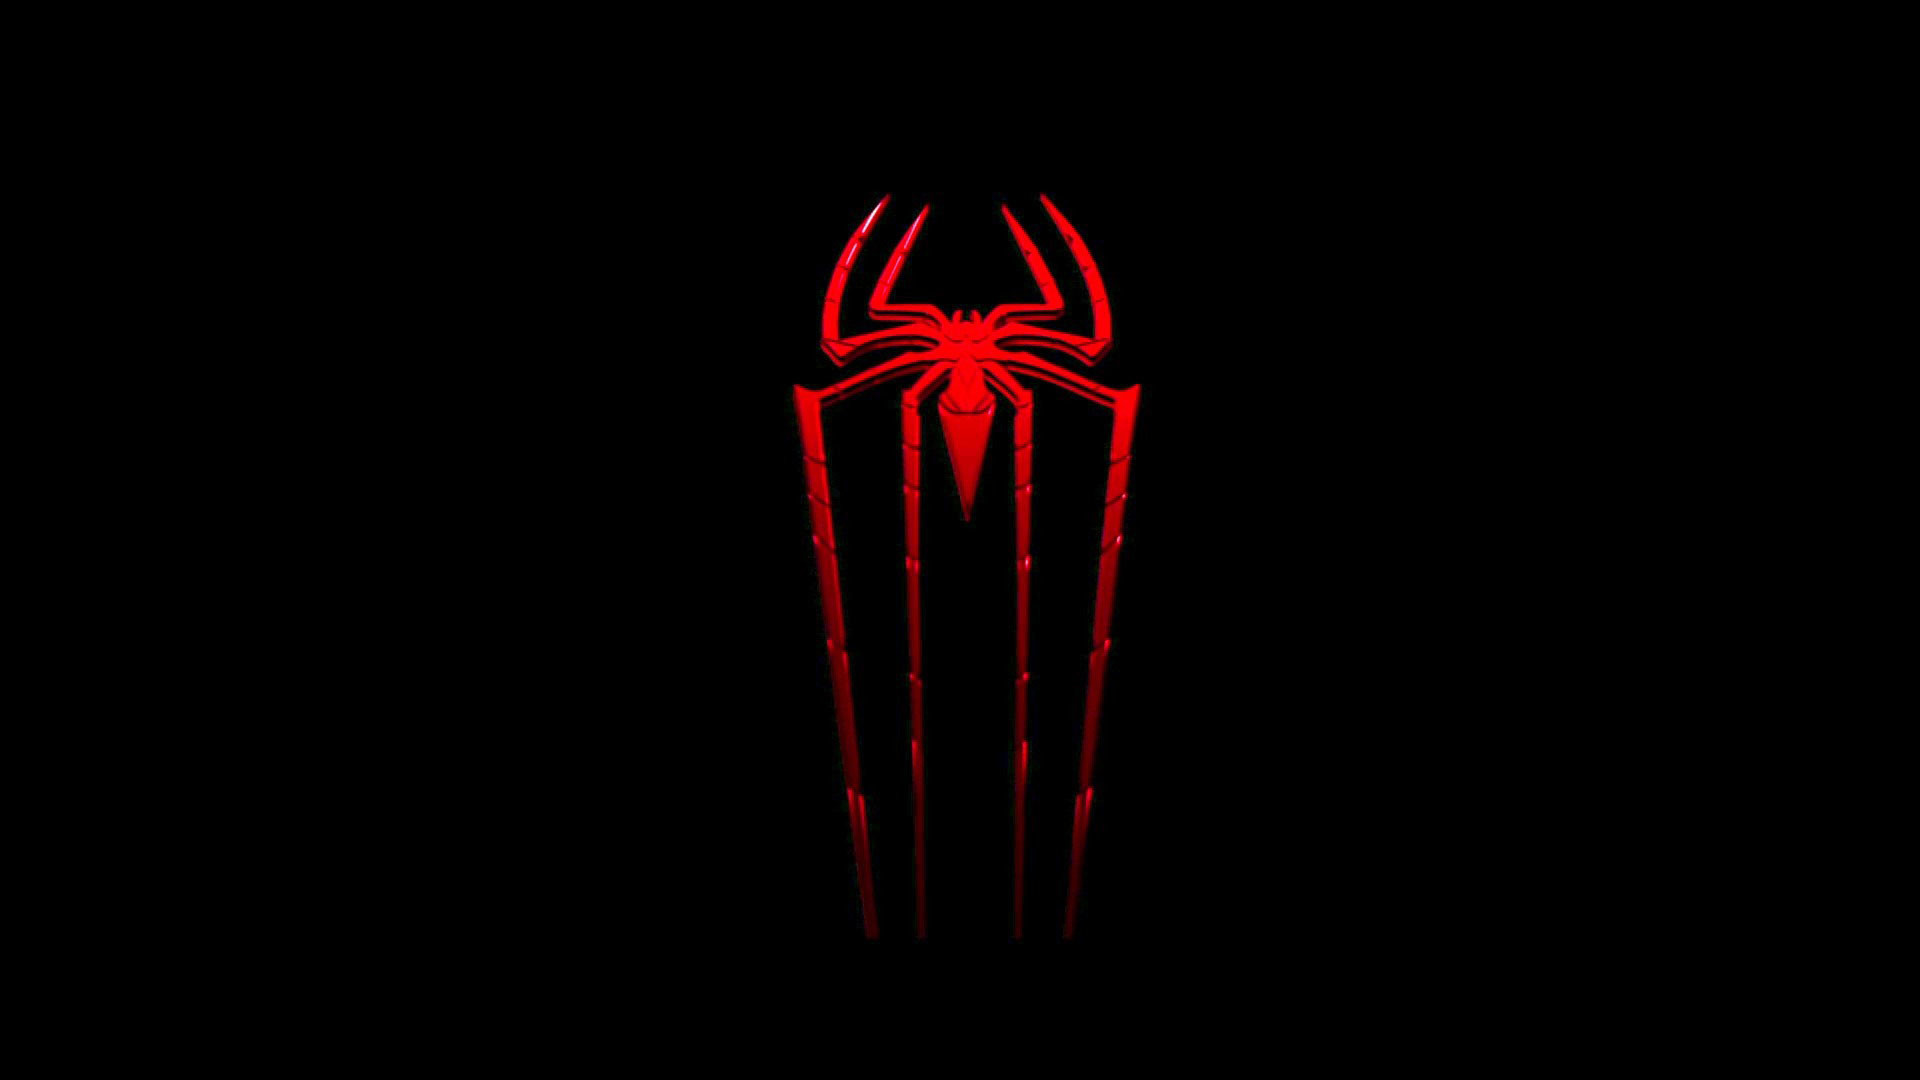 1920x1080 hd pics photos attractive red spider logo neon spiderman hollywood movie hd  quality desktop background wallpaper